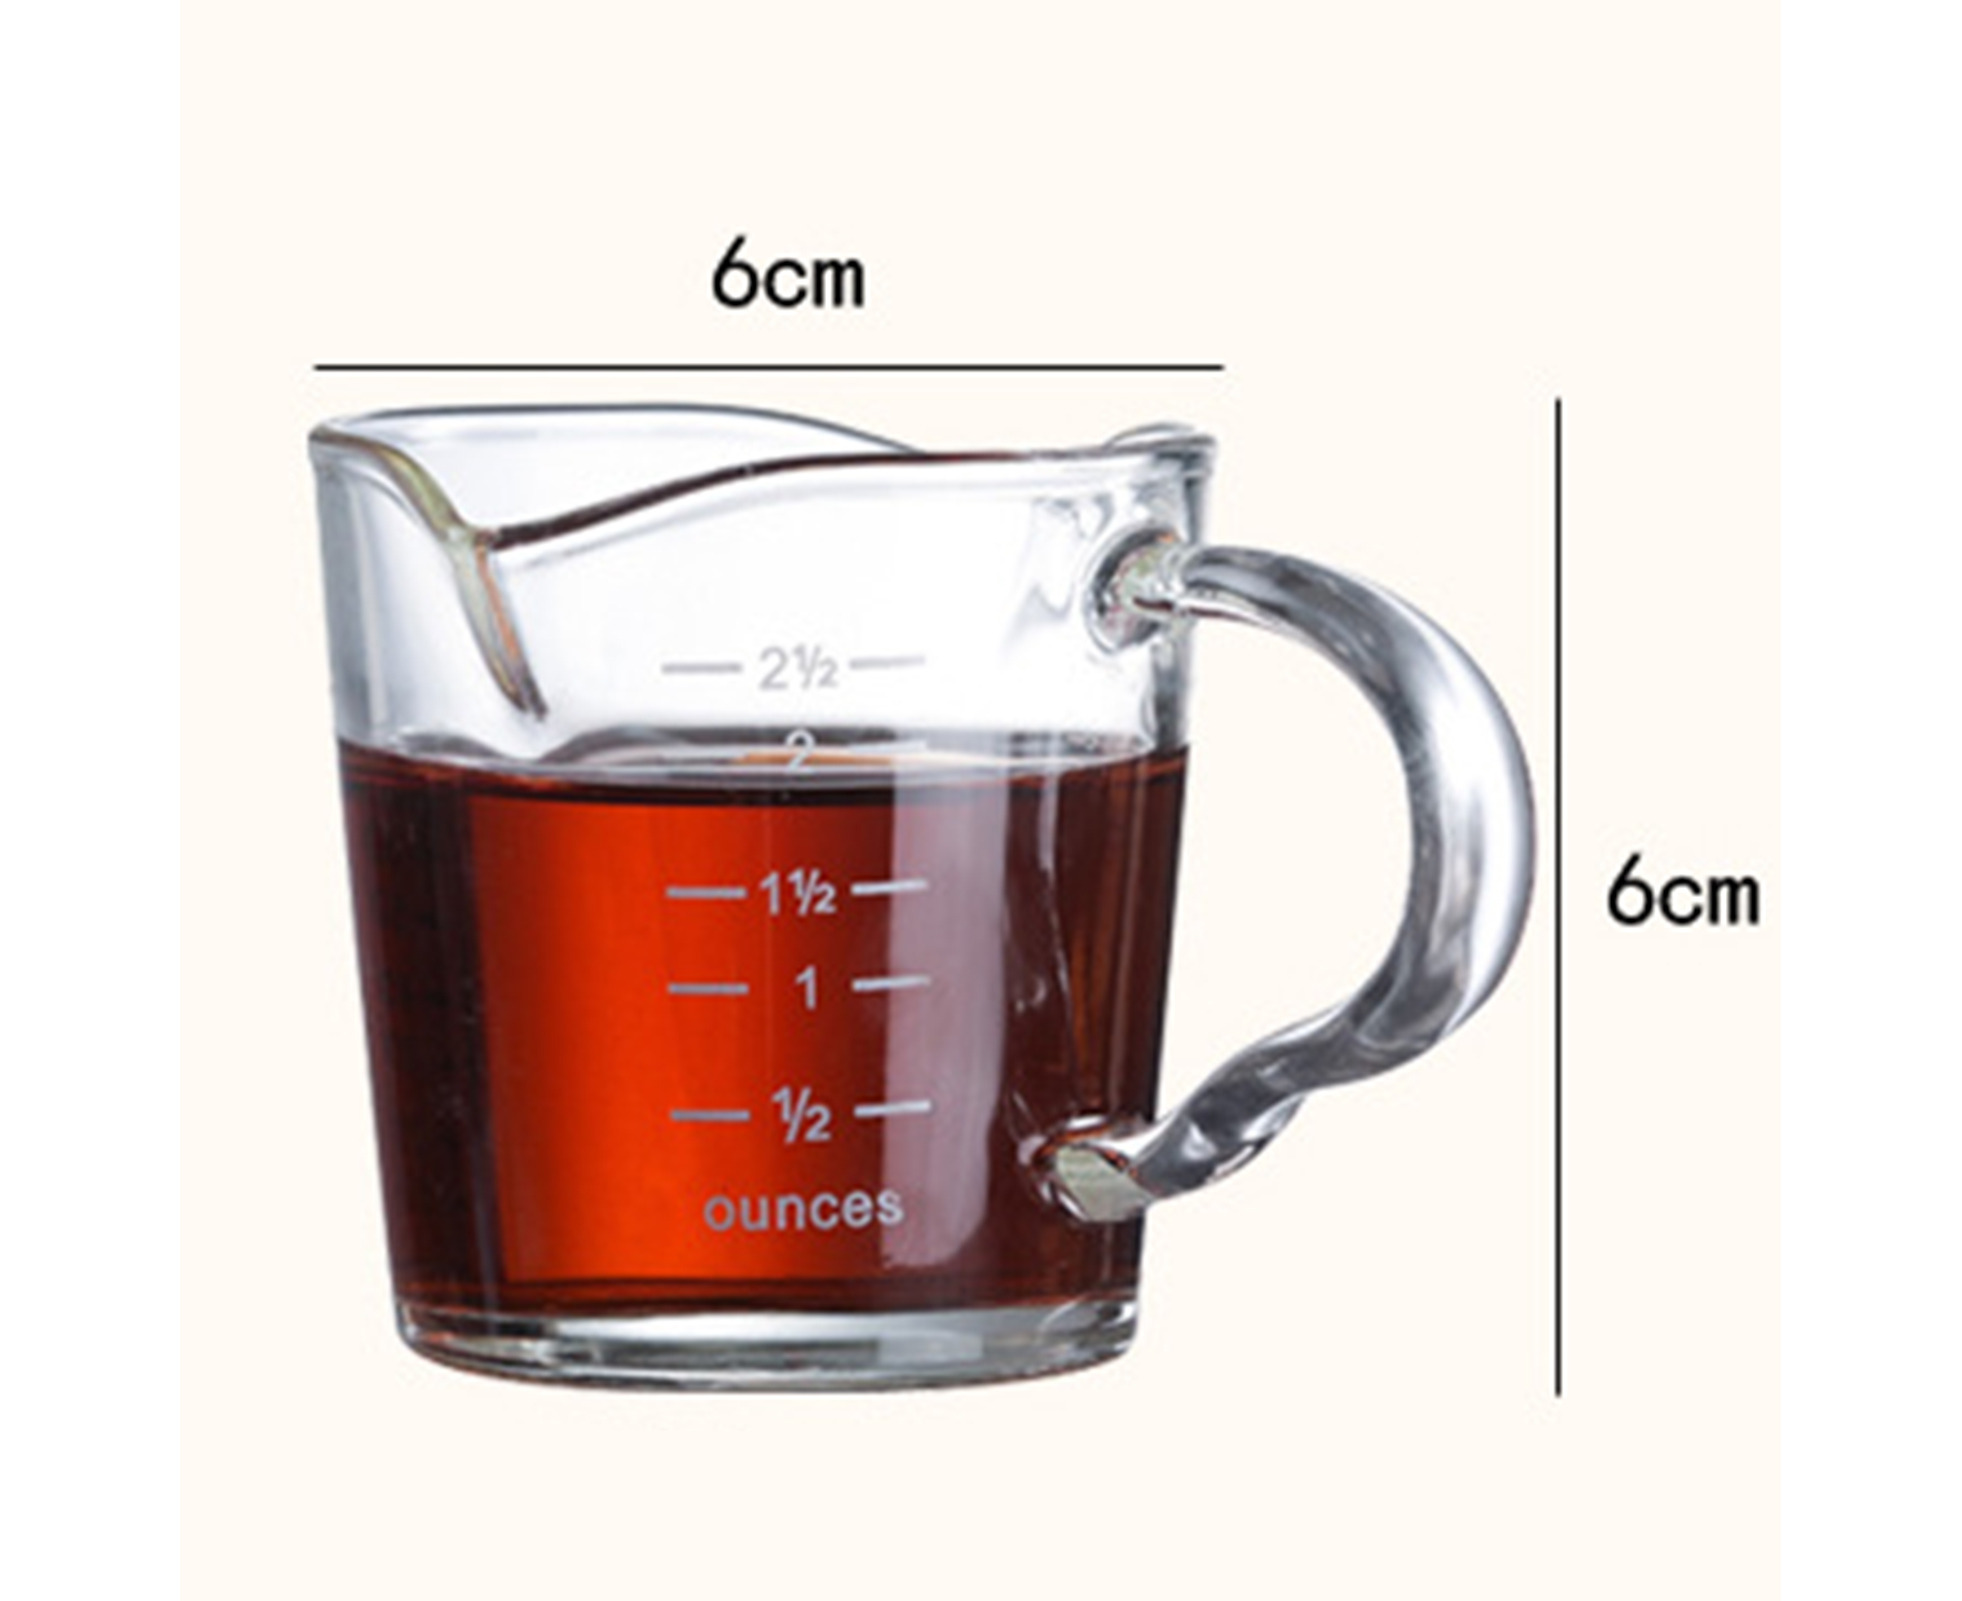 70ml Heat-resistant Glass Measuring Milk Cup Small Milk Cup